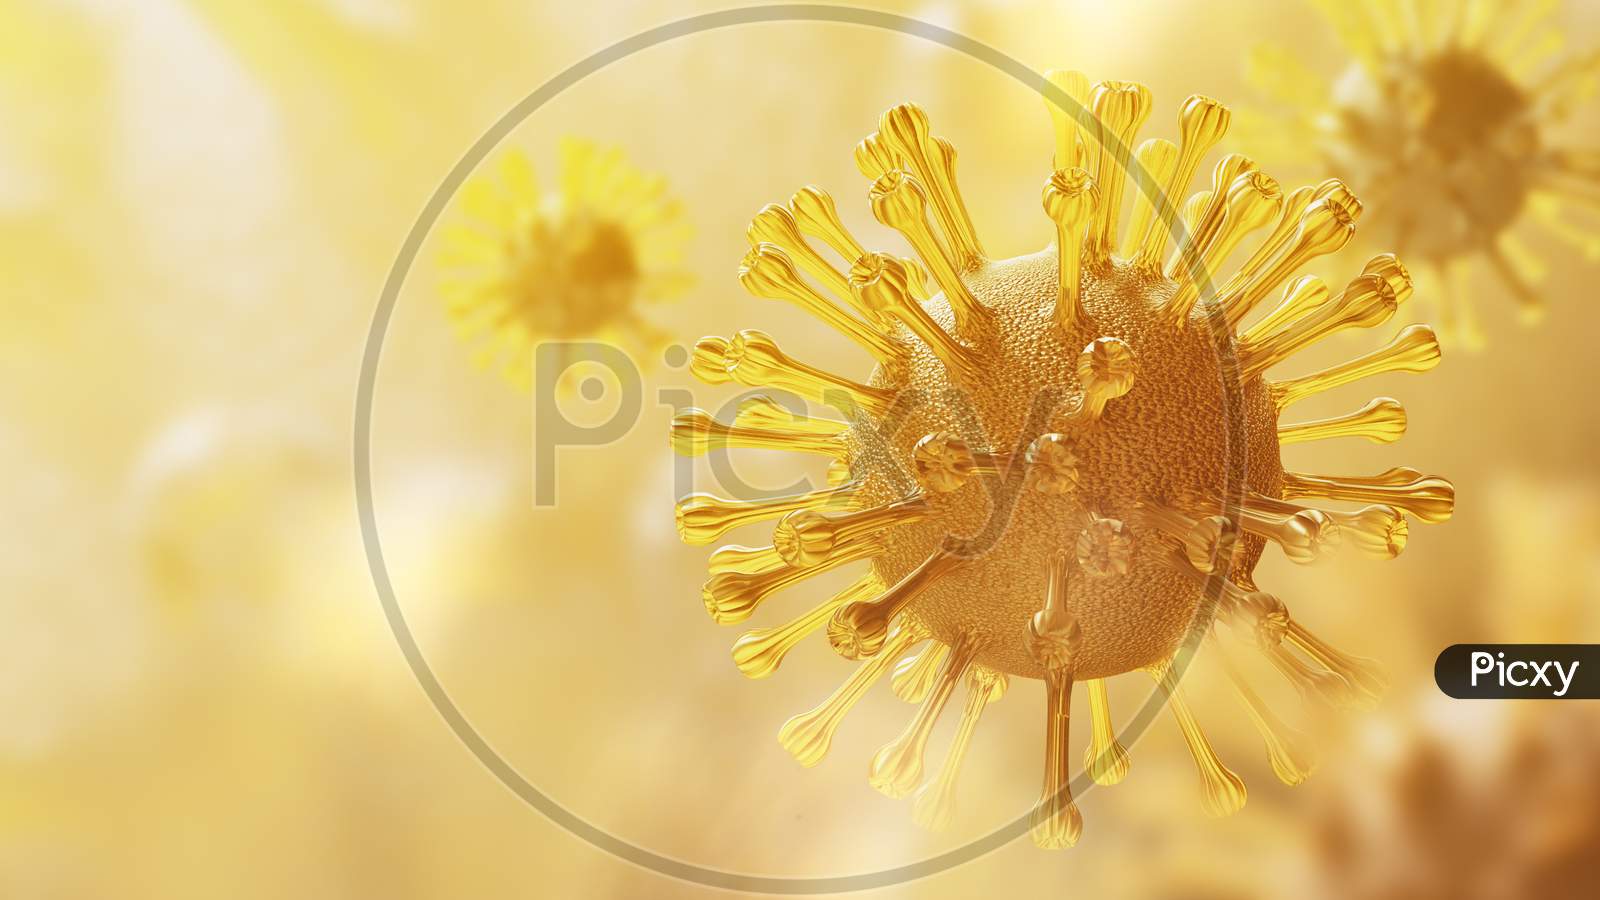 Super Closeup Coronavirus Covid-19 In Human Lung Body Background. Science Microbiology Concept. Yellow Corona Virus Outbreak Epidemic. Medical Health Virology Infection Research. 3D Illustration